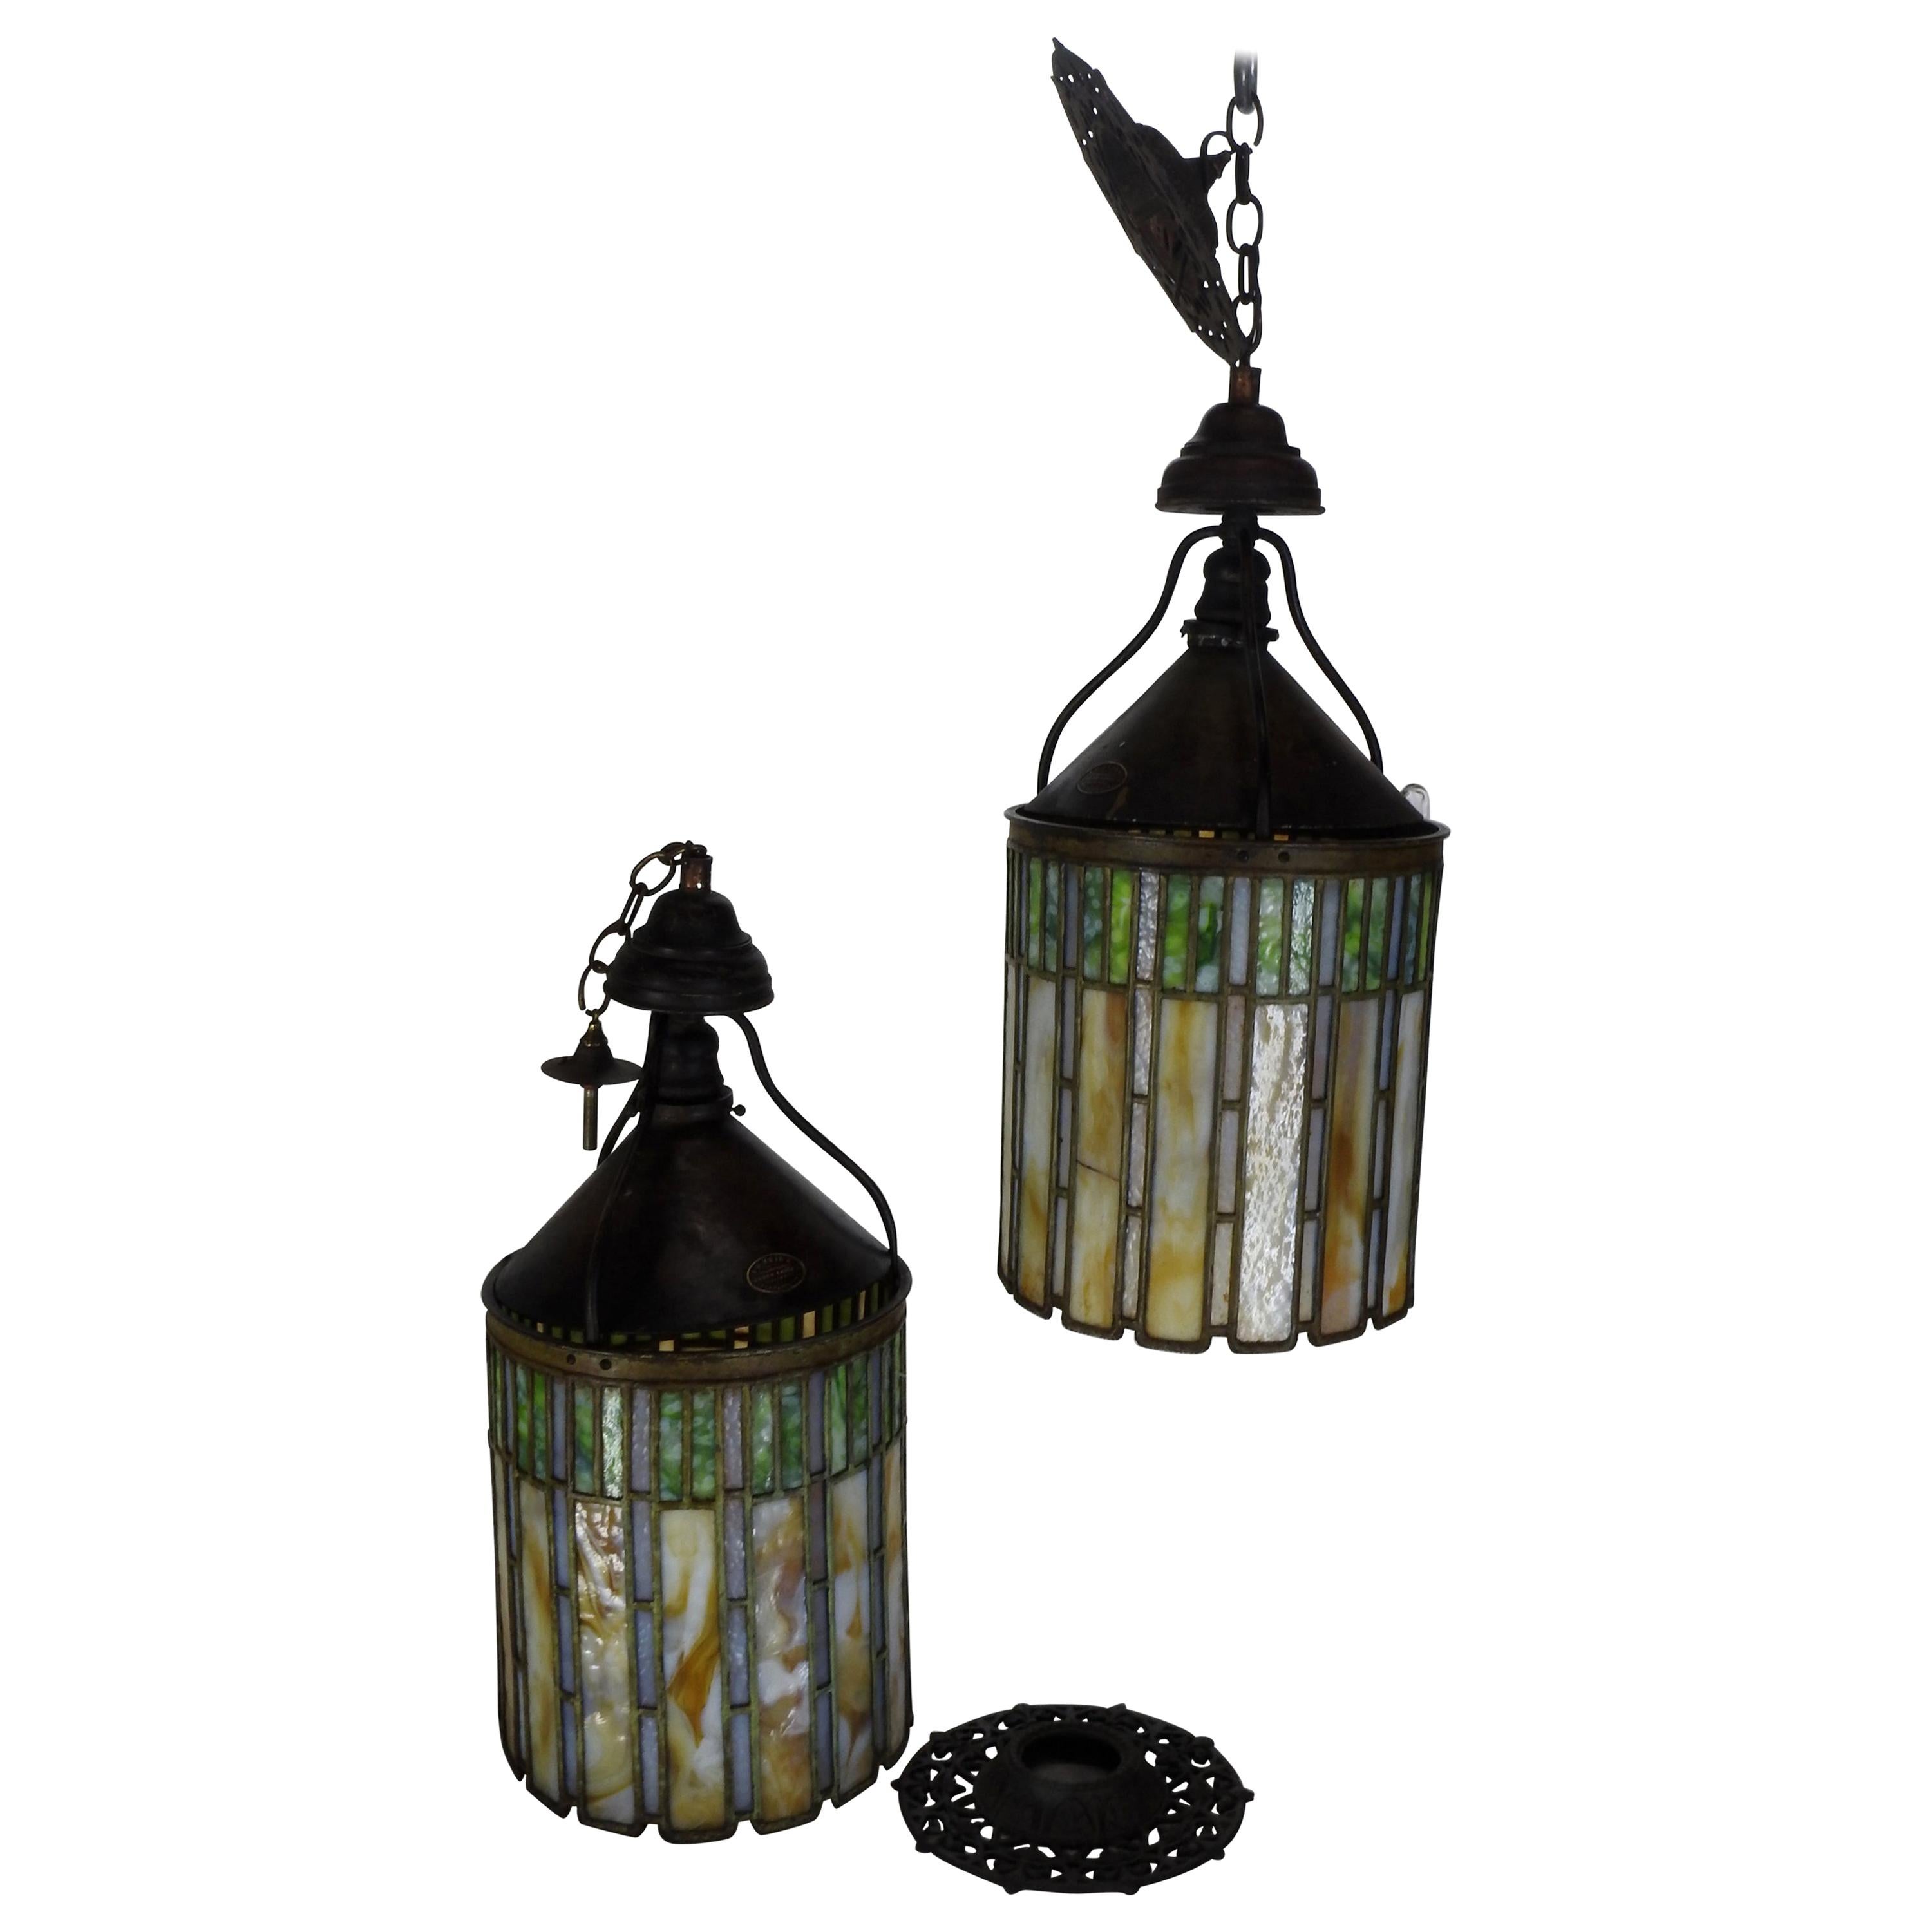 I. P. Frink Stained Glass Hanging Light Fixtures For Sale